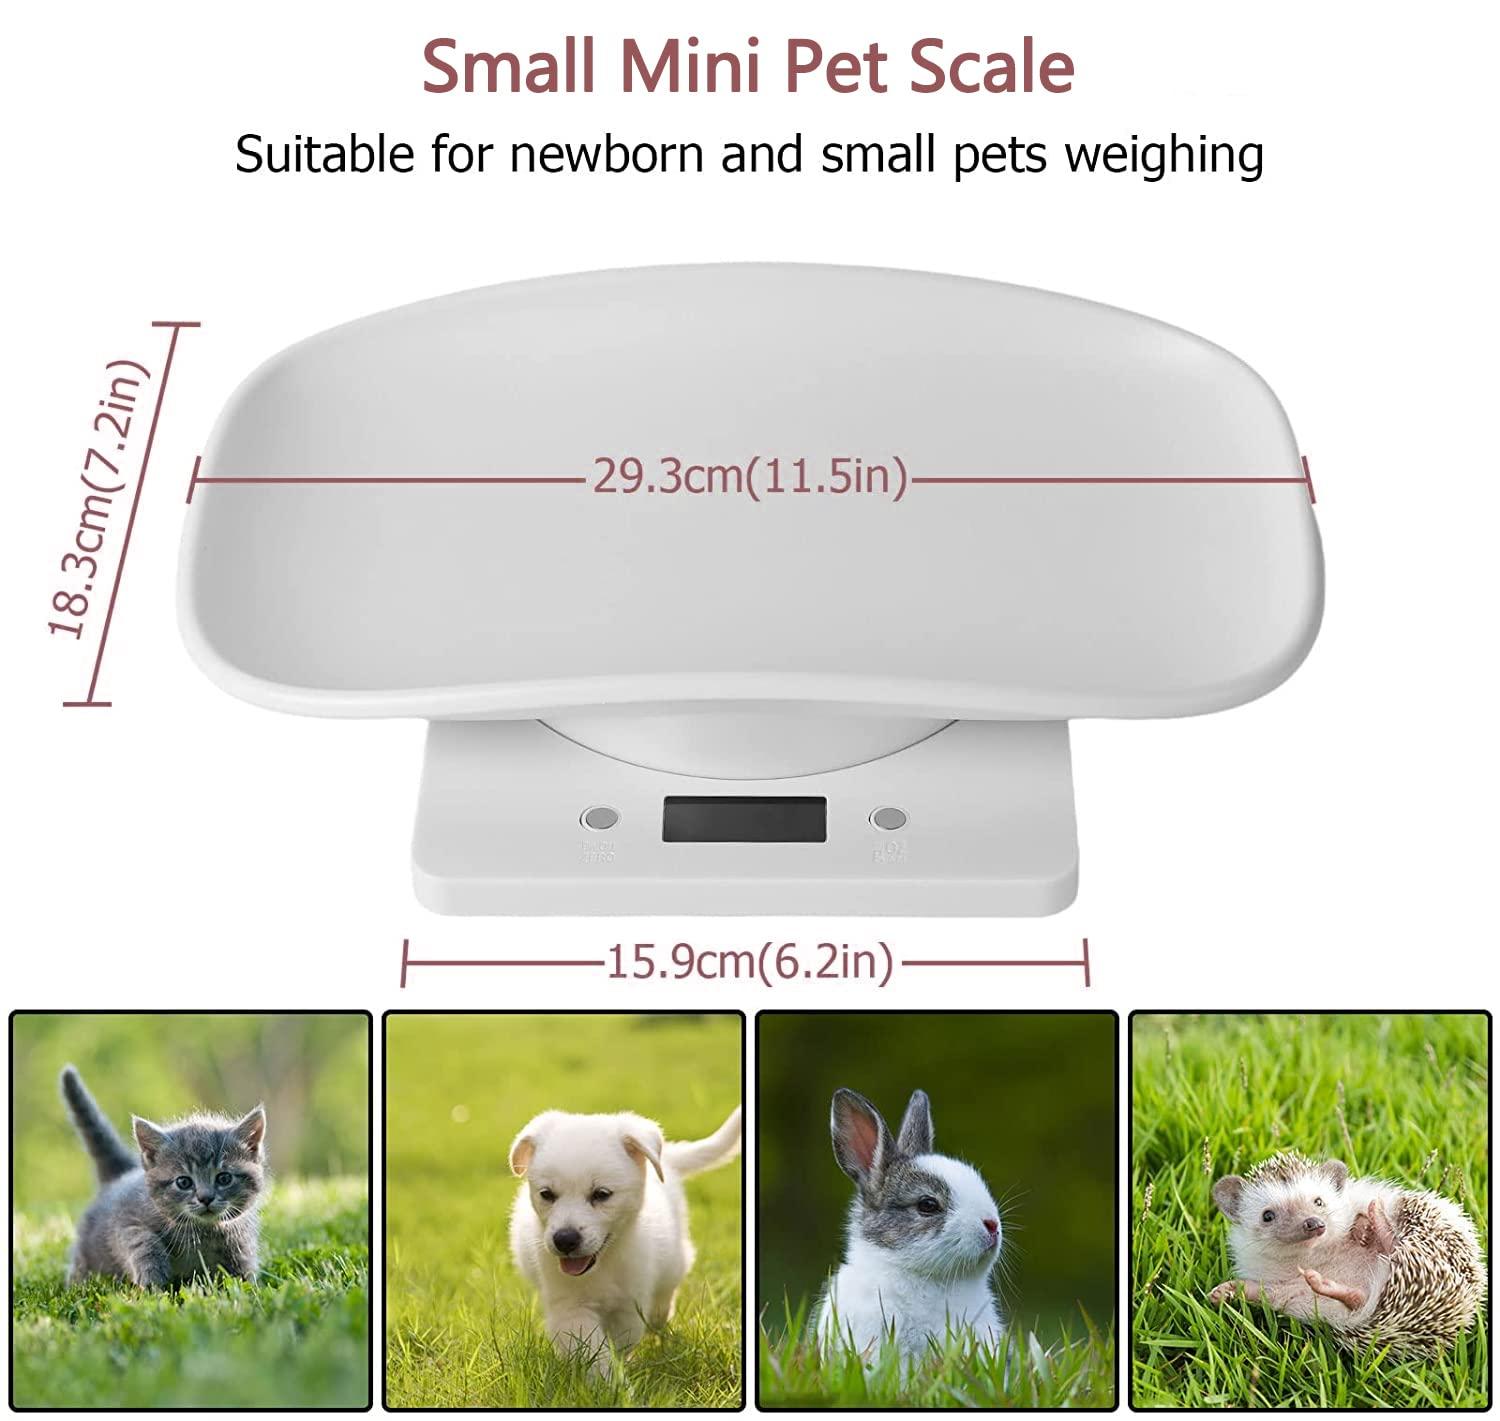 10kg PET Weight Scale Digital LCD Electronic Body Pet Puppies Kittens Scales